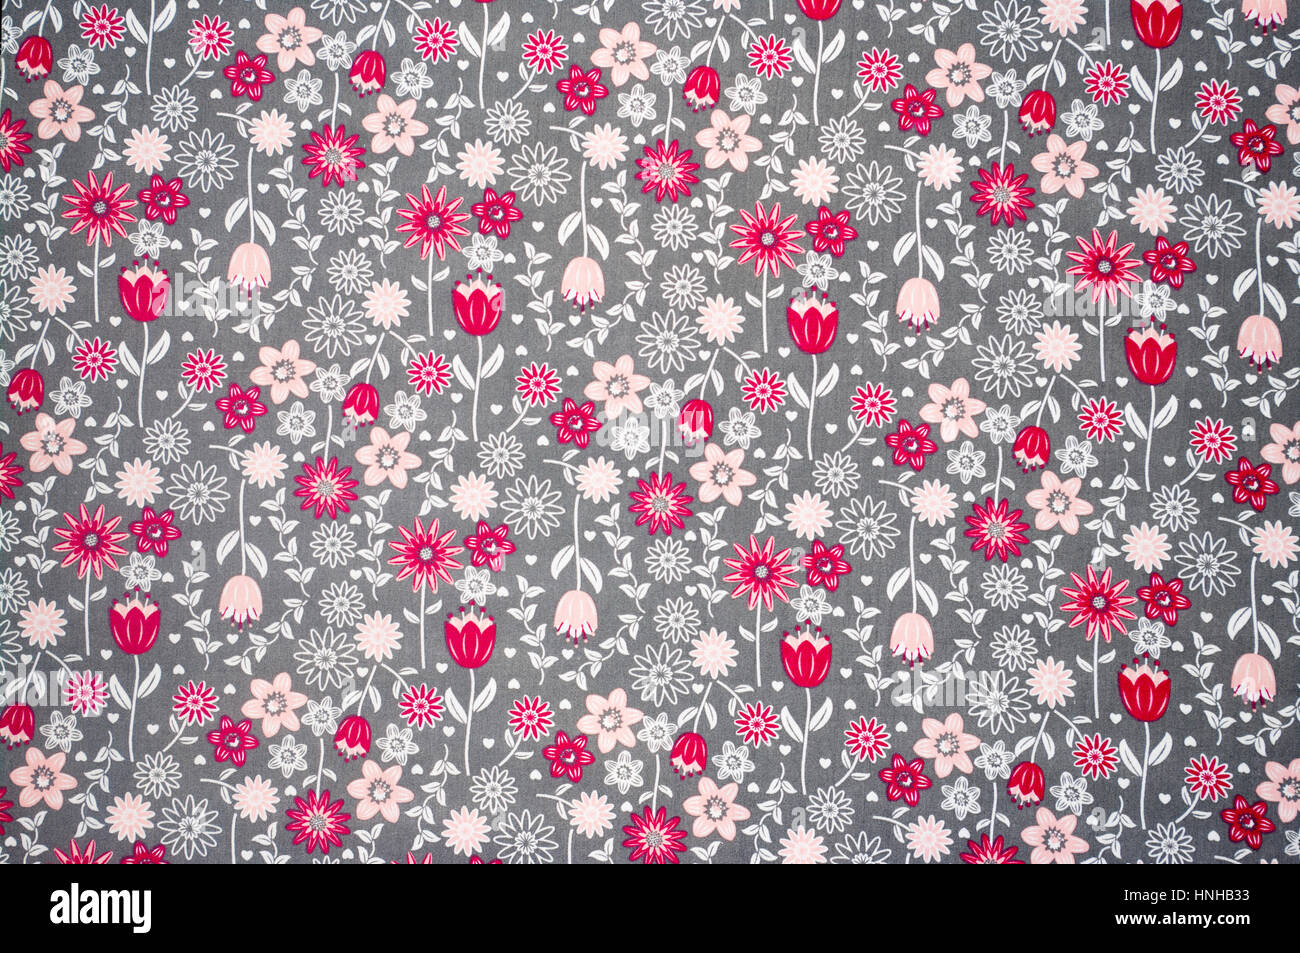 Red Pink and White Repetative Printed Flowers Floral Pattern On Grey Cloth Background Stock Photo